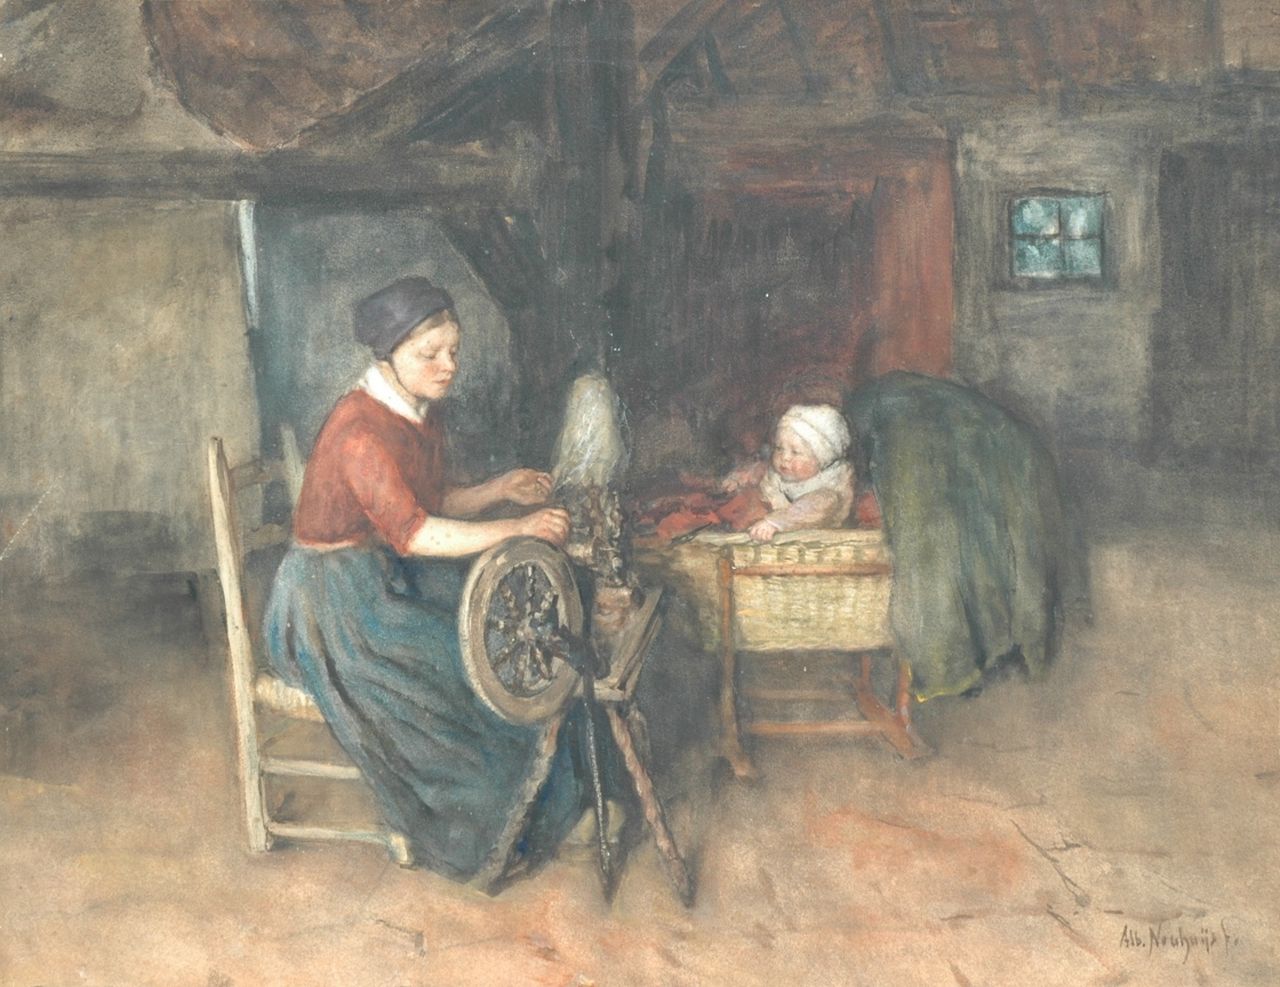 Neuhuys J.A.  | Johannes 'Albert' Neuhuys, Young farmer's wife at the spinning wheel with her baby in a cradle, watercolour on paper laid down on board 52.3 x 67.5 cm, signed l.r.